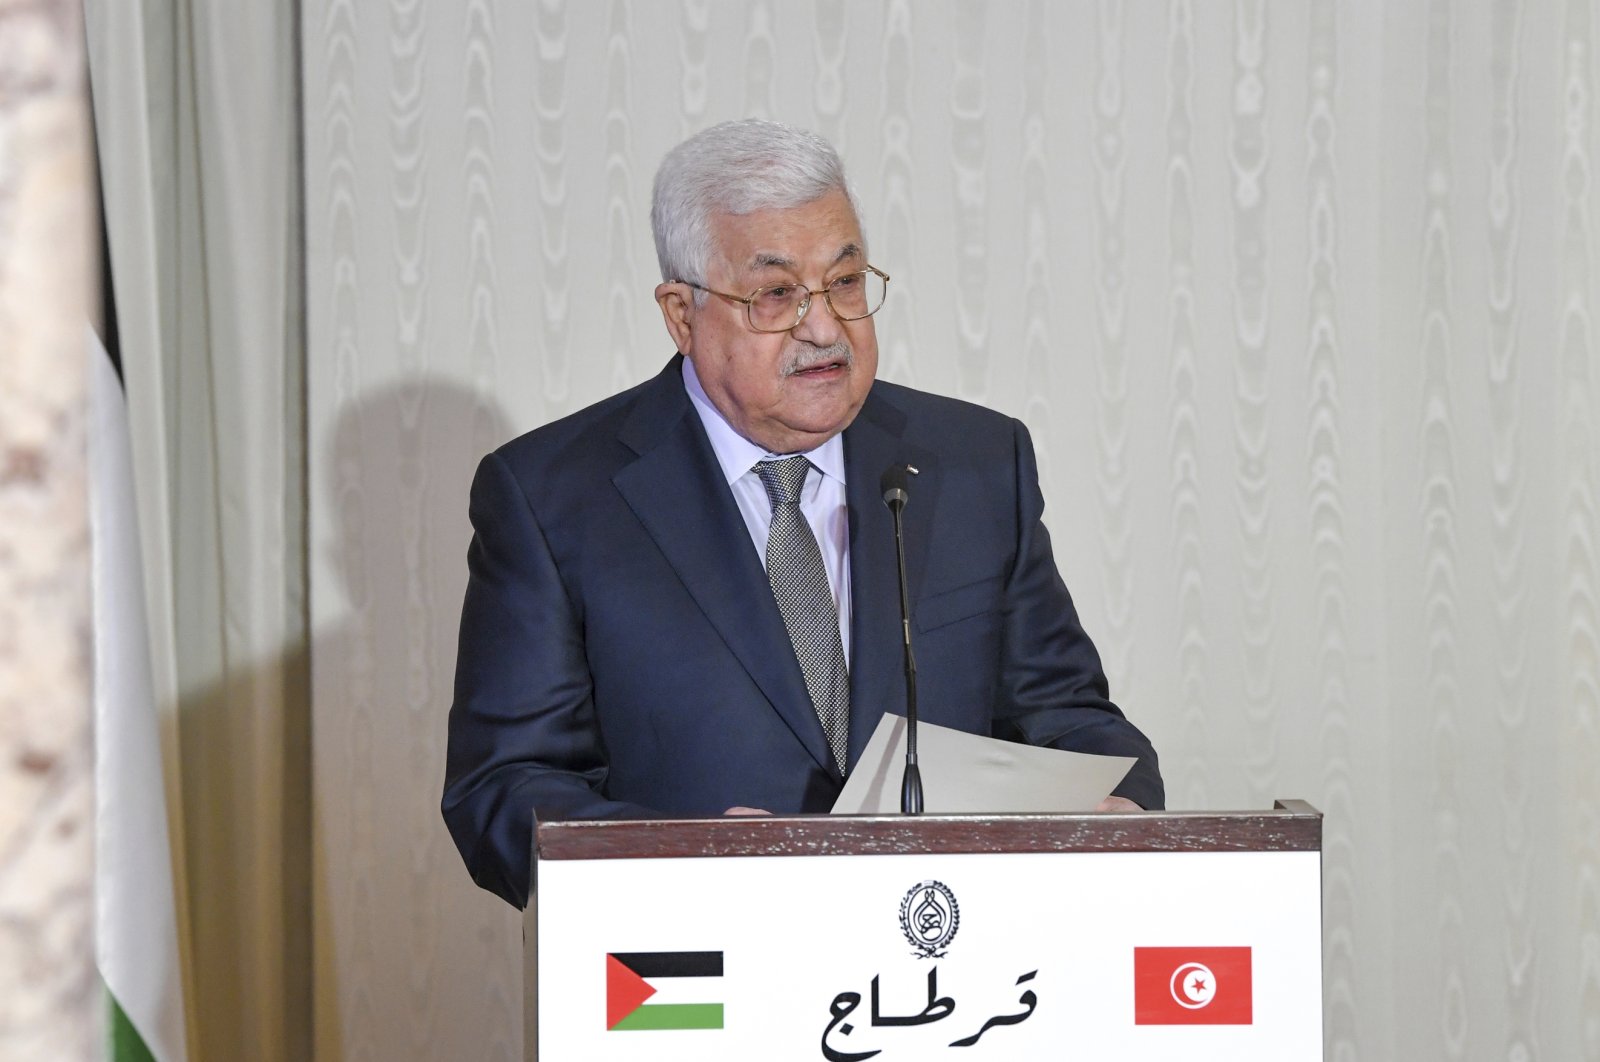 Palestinian President Mahmoud Abbas speaks during a joint press conference with his Tunisian counterpart, Kais Saied, in Carthage, near Tunis, Tunisia, Dec. 8, 2021. (AP Photo)